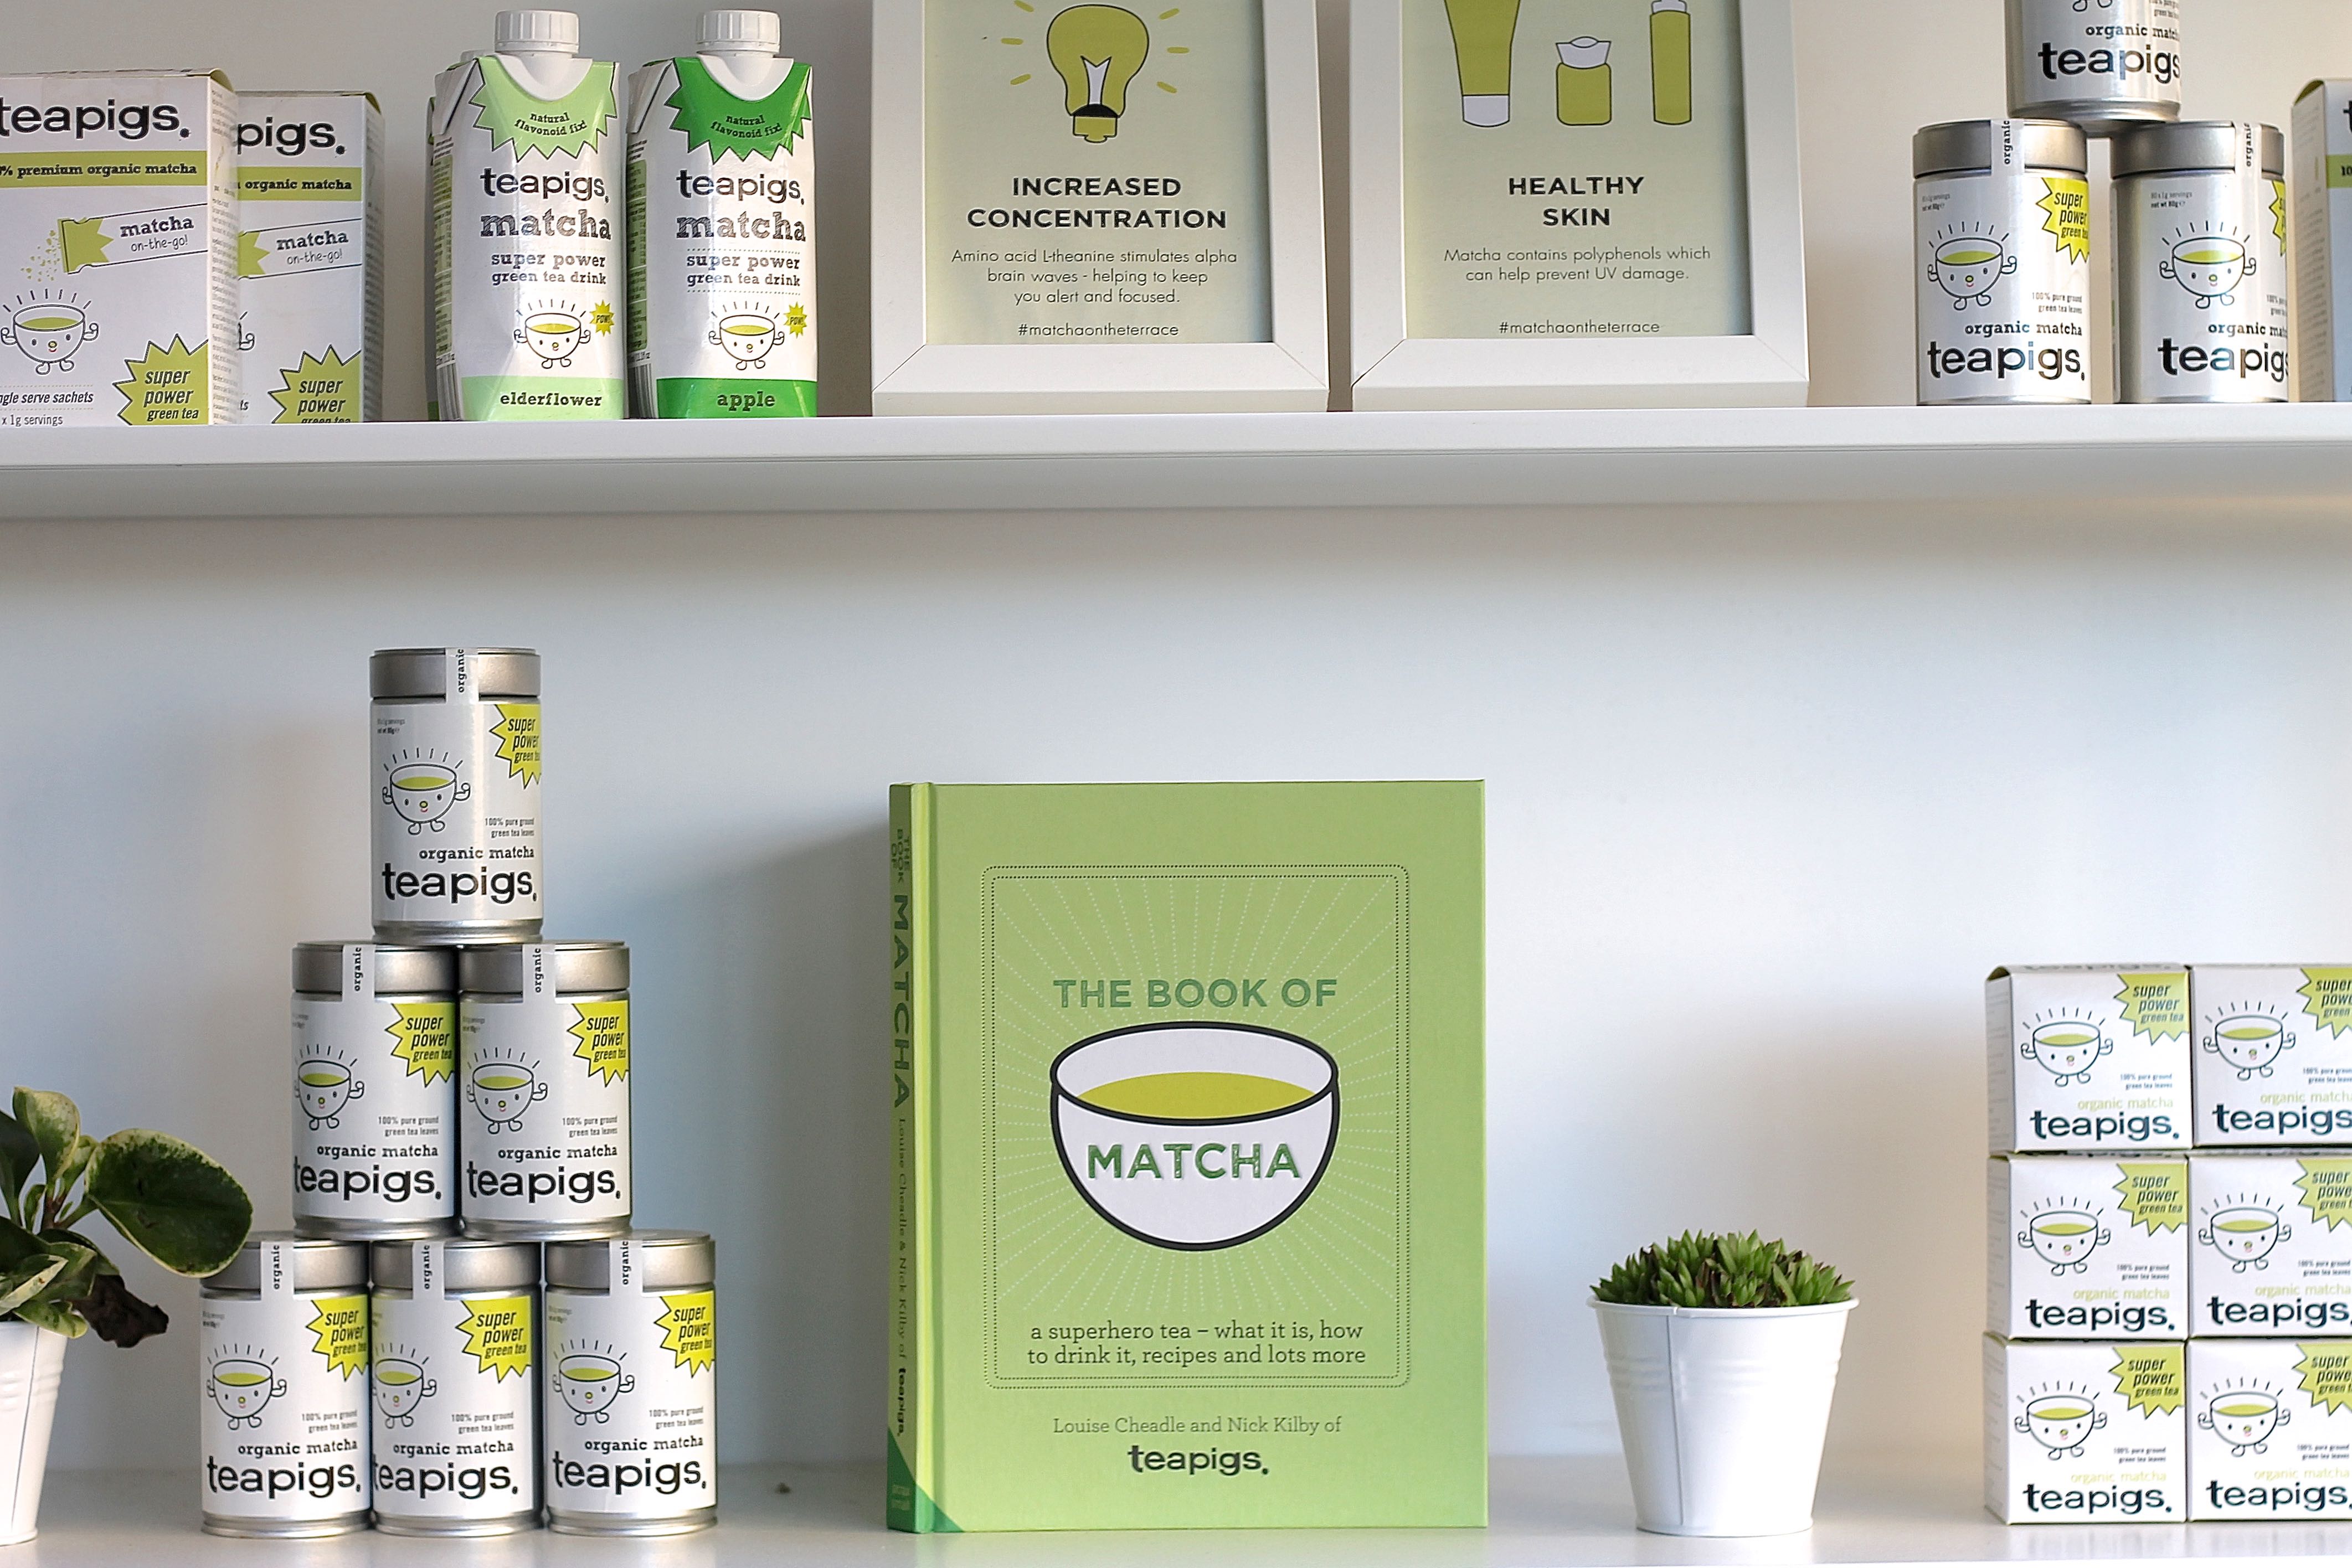 The book of matcha recipes